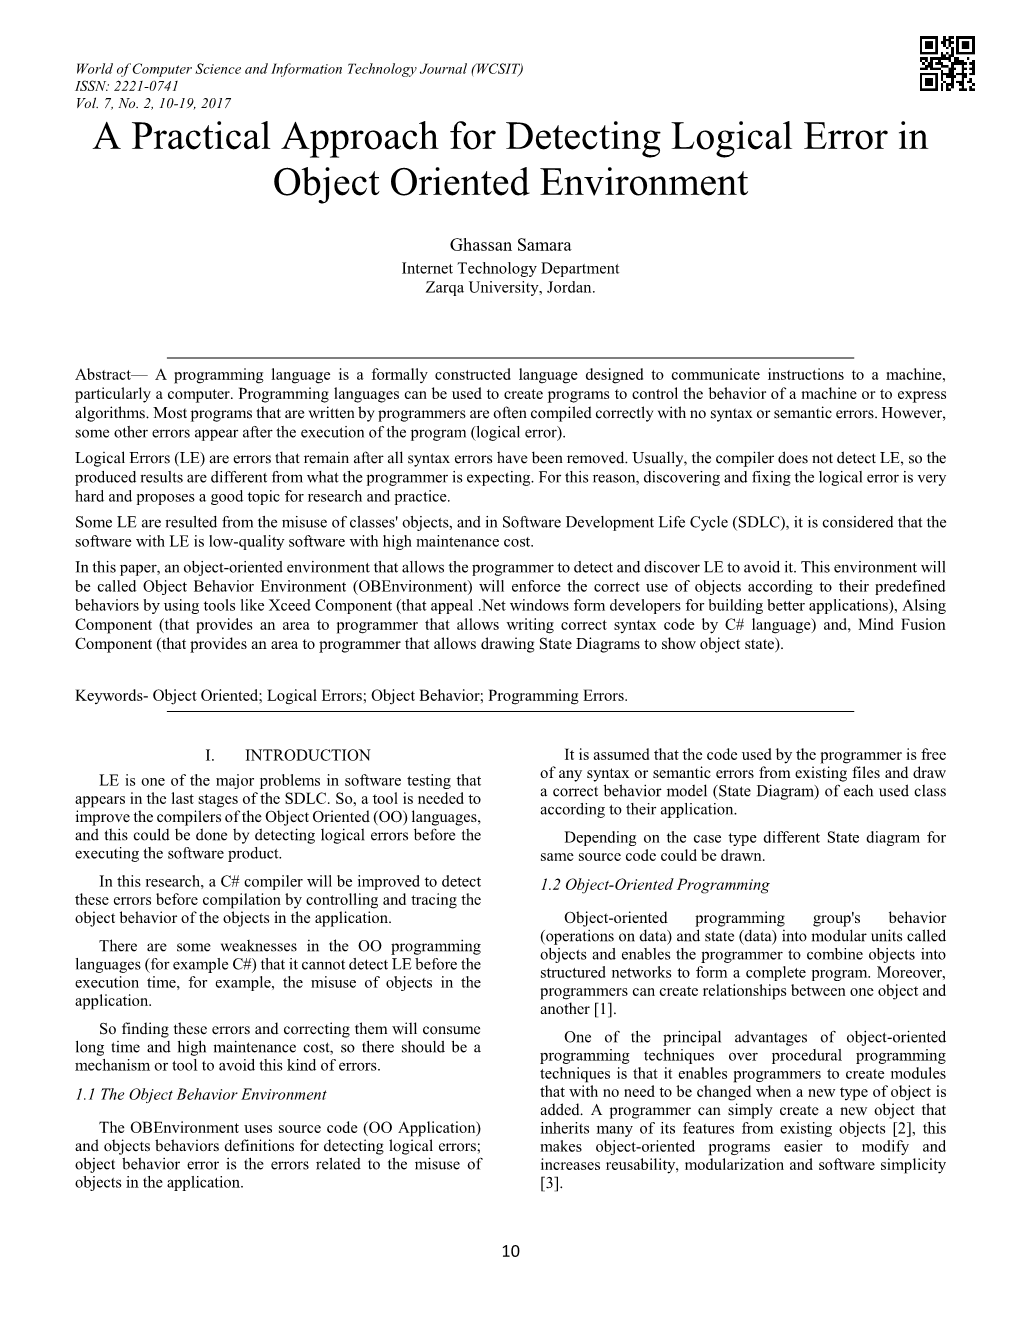 A Practical Approach for Detecting Logical Error in Object Oriented Environment